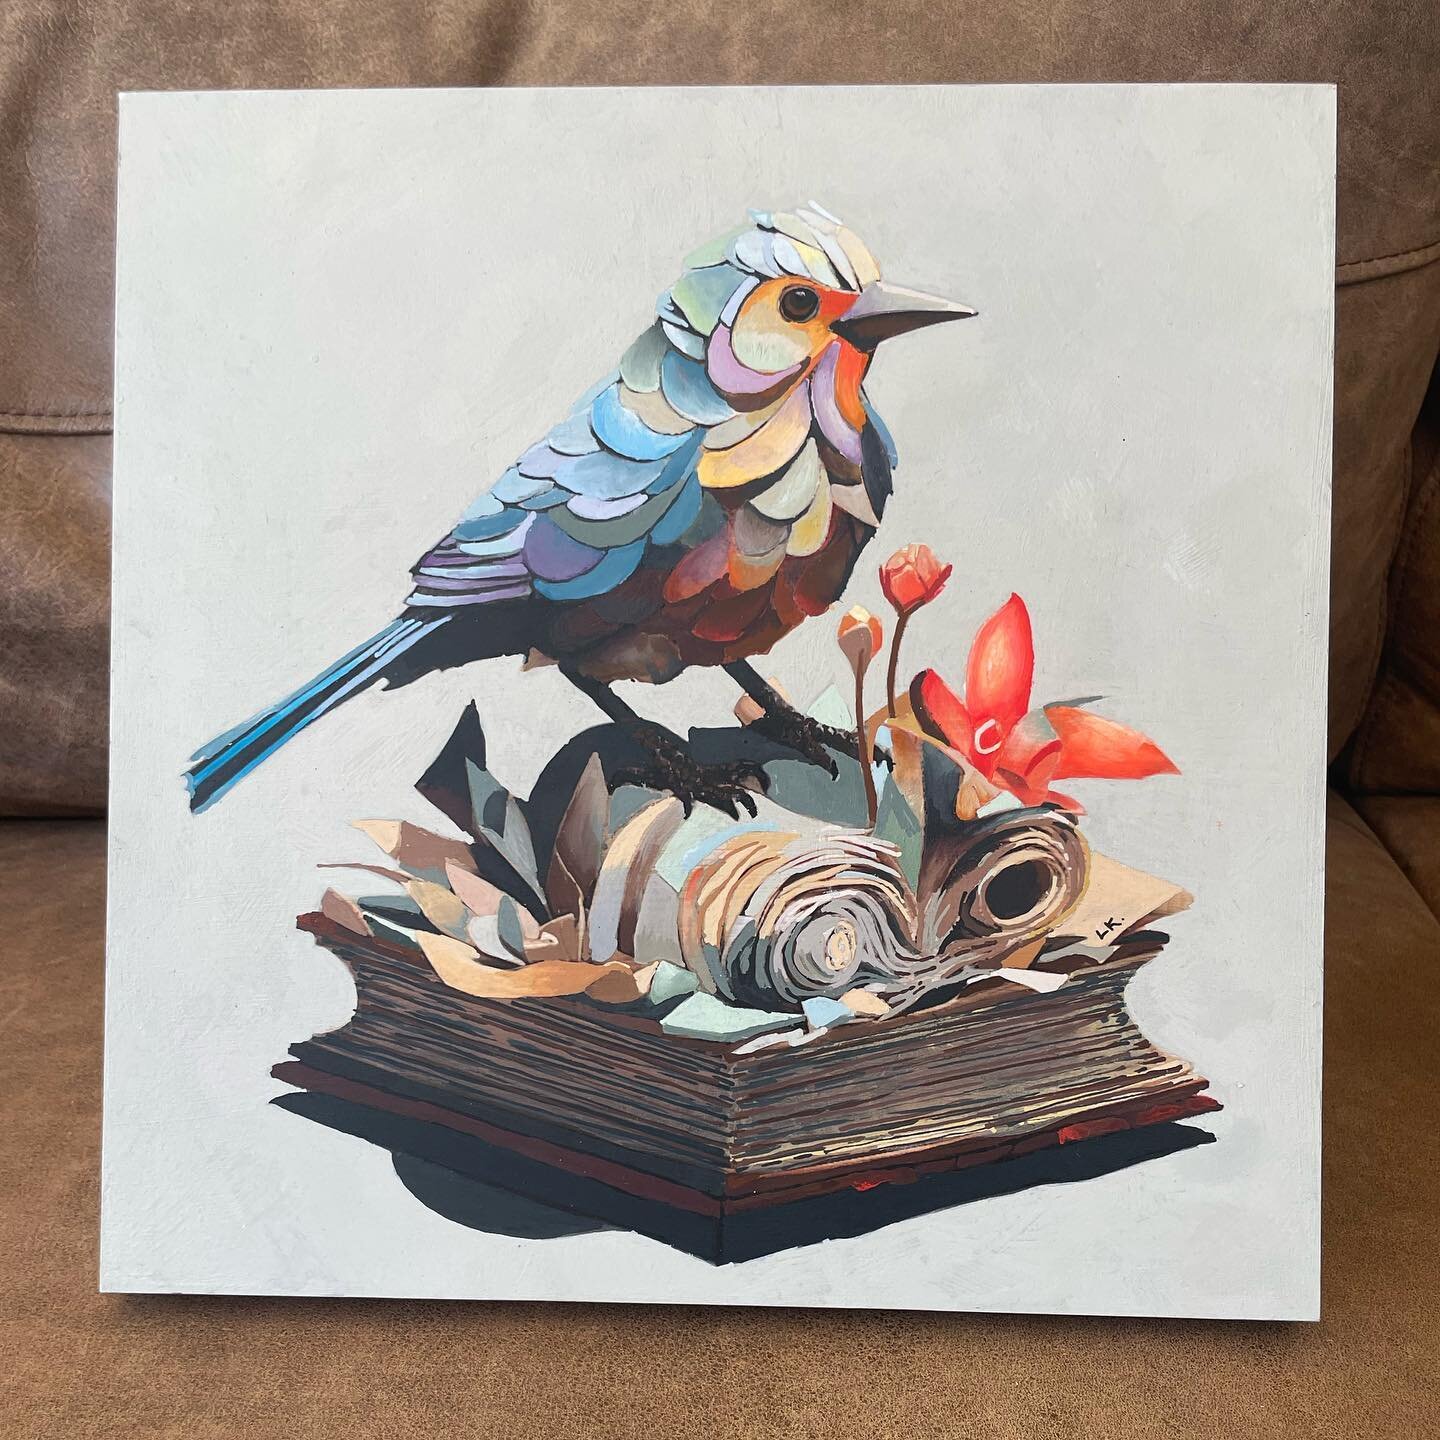 Finally, my next project! A different type of bird - one rising from fiction.  Acrylic on board, 30x30cm. It took forever&hellip; hopefully I can get quicker or I&rsquo;ll be making one a month 😅.
#quilling #quillingart #origamiart #bookart